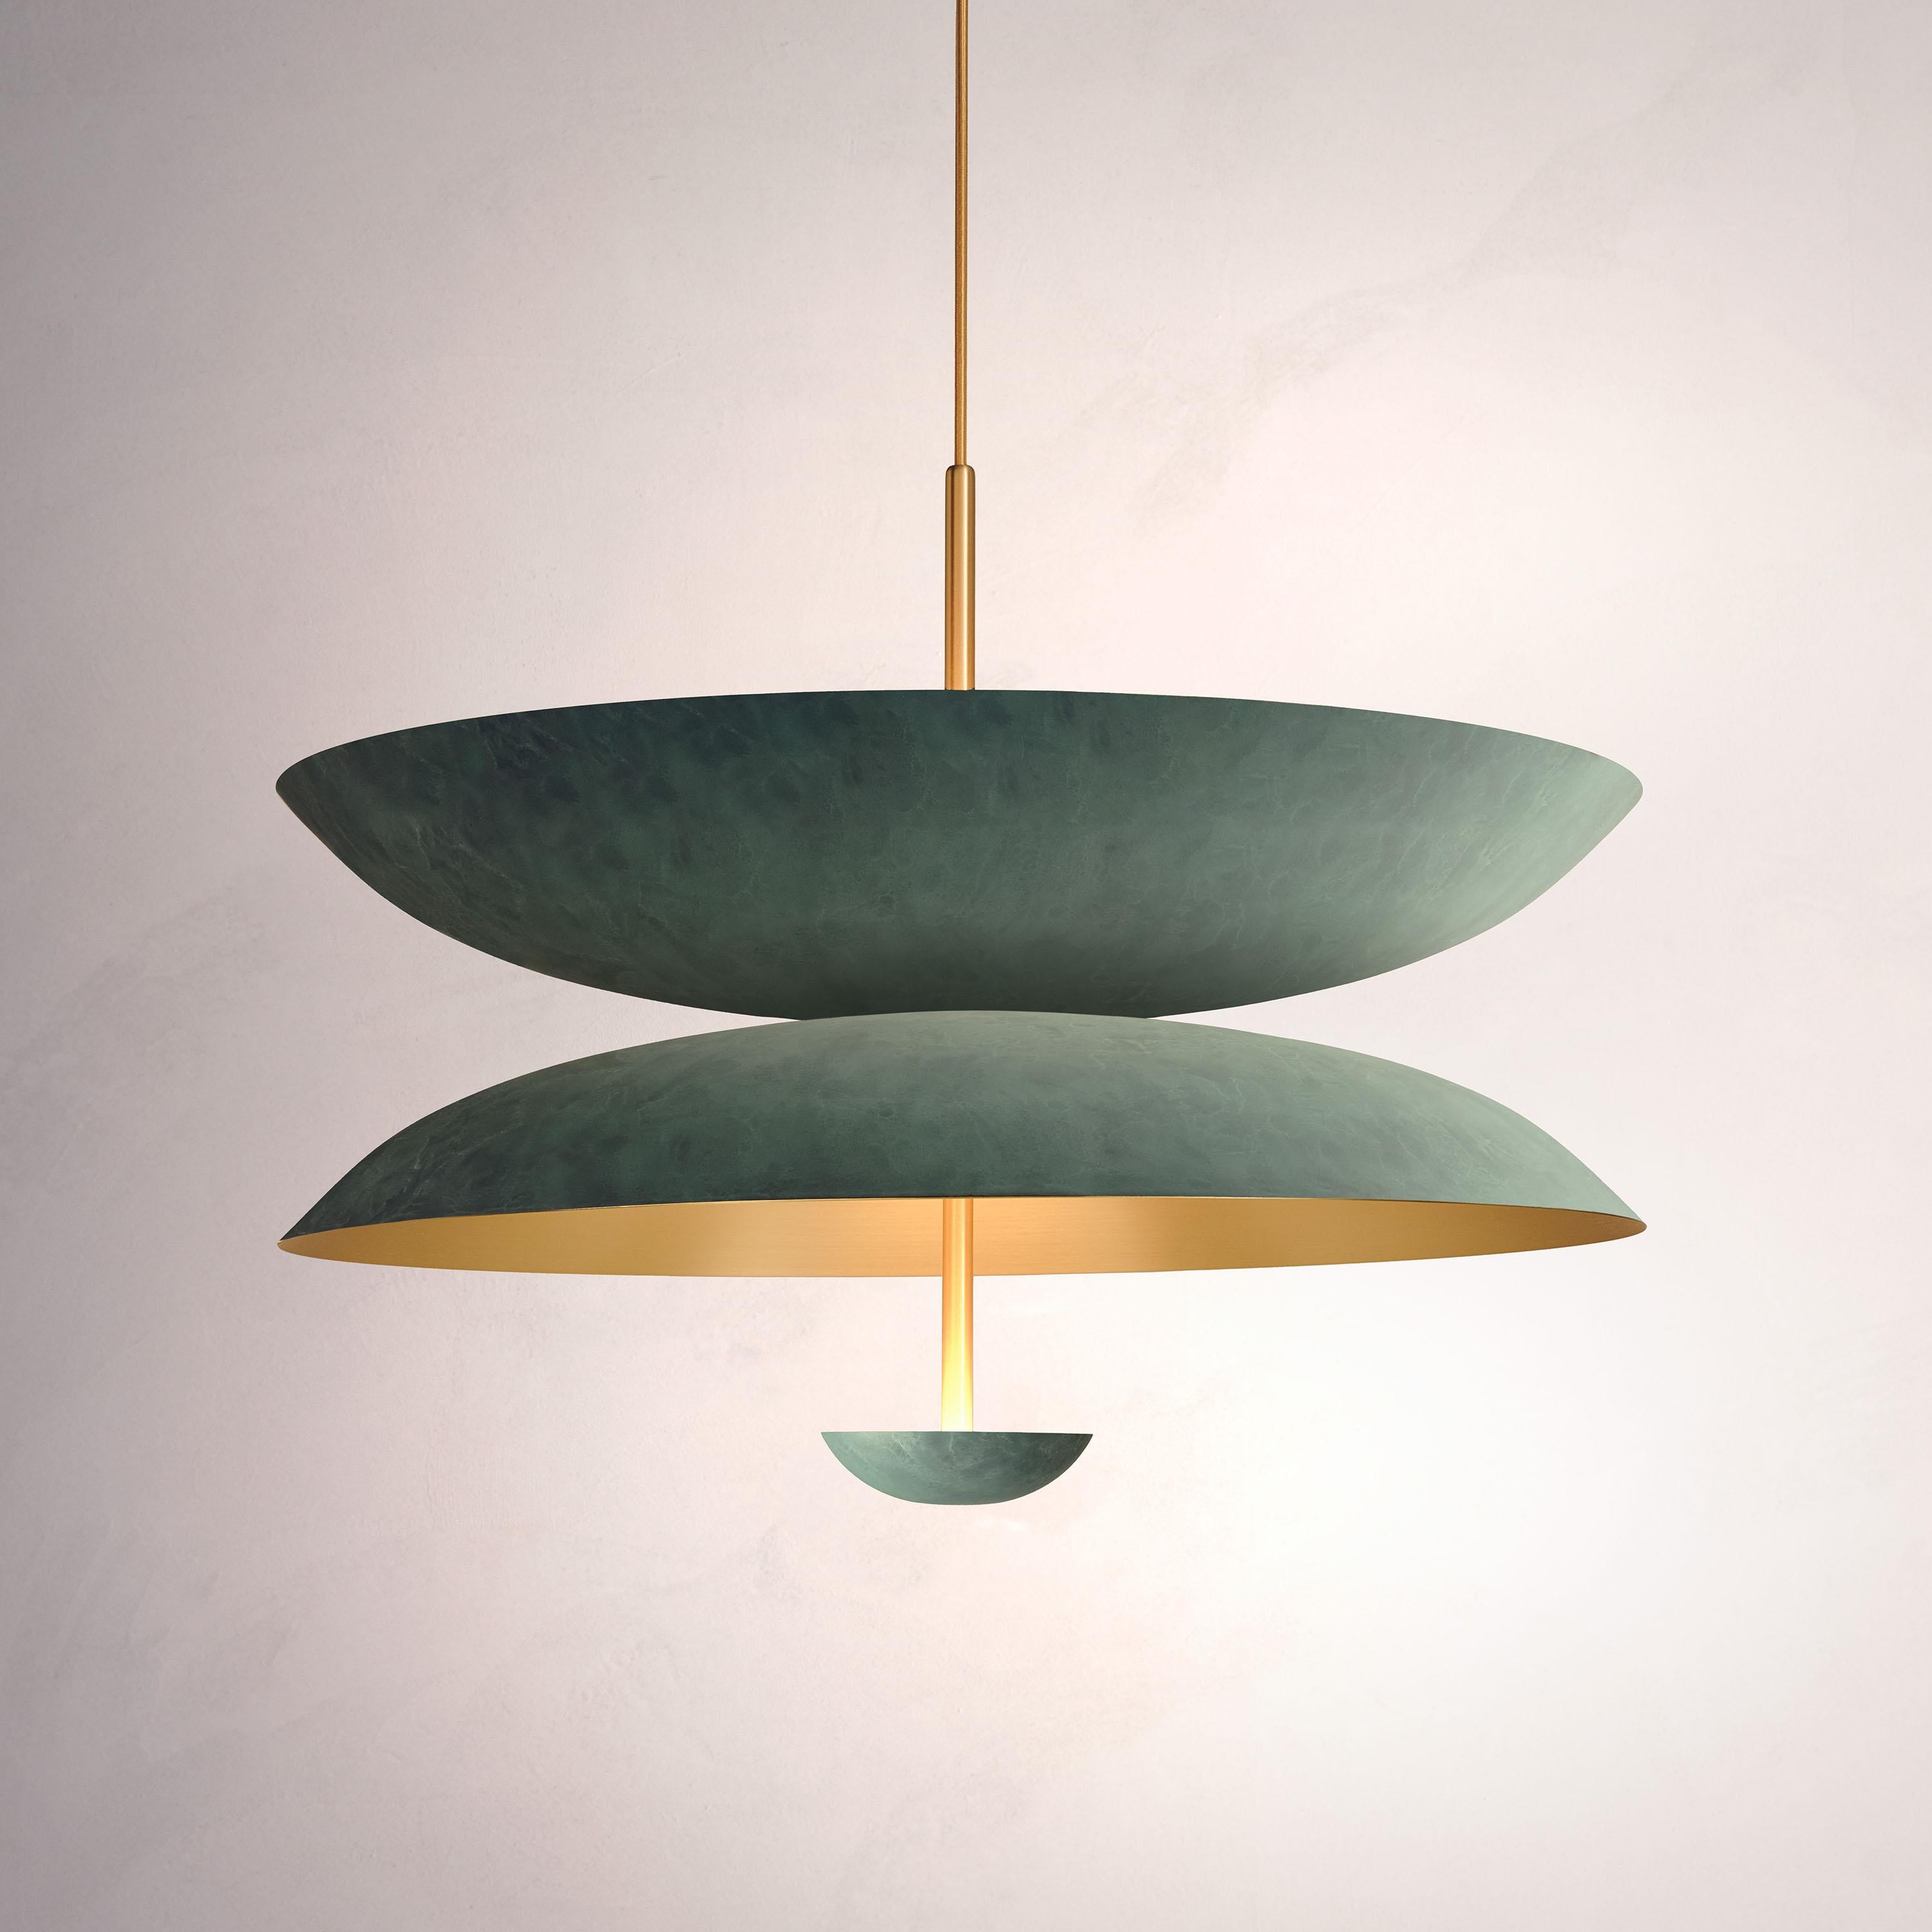 Inspired by planet-like shapes and textures, the Cosmic collection plays with both metal properties and a selection of patina finishes.
 
The Pendant Duo Verdigris is composed of three carefully hand-spun brass plates and preserves the beautiful